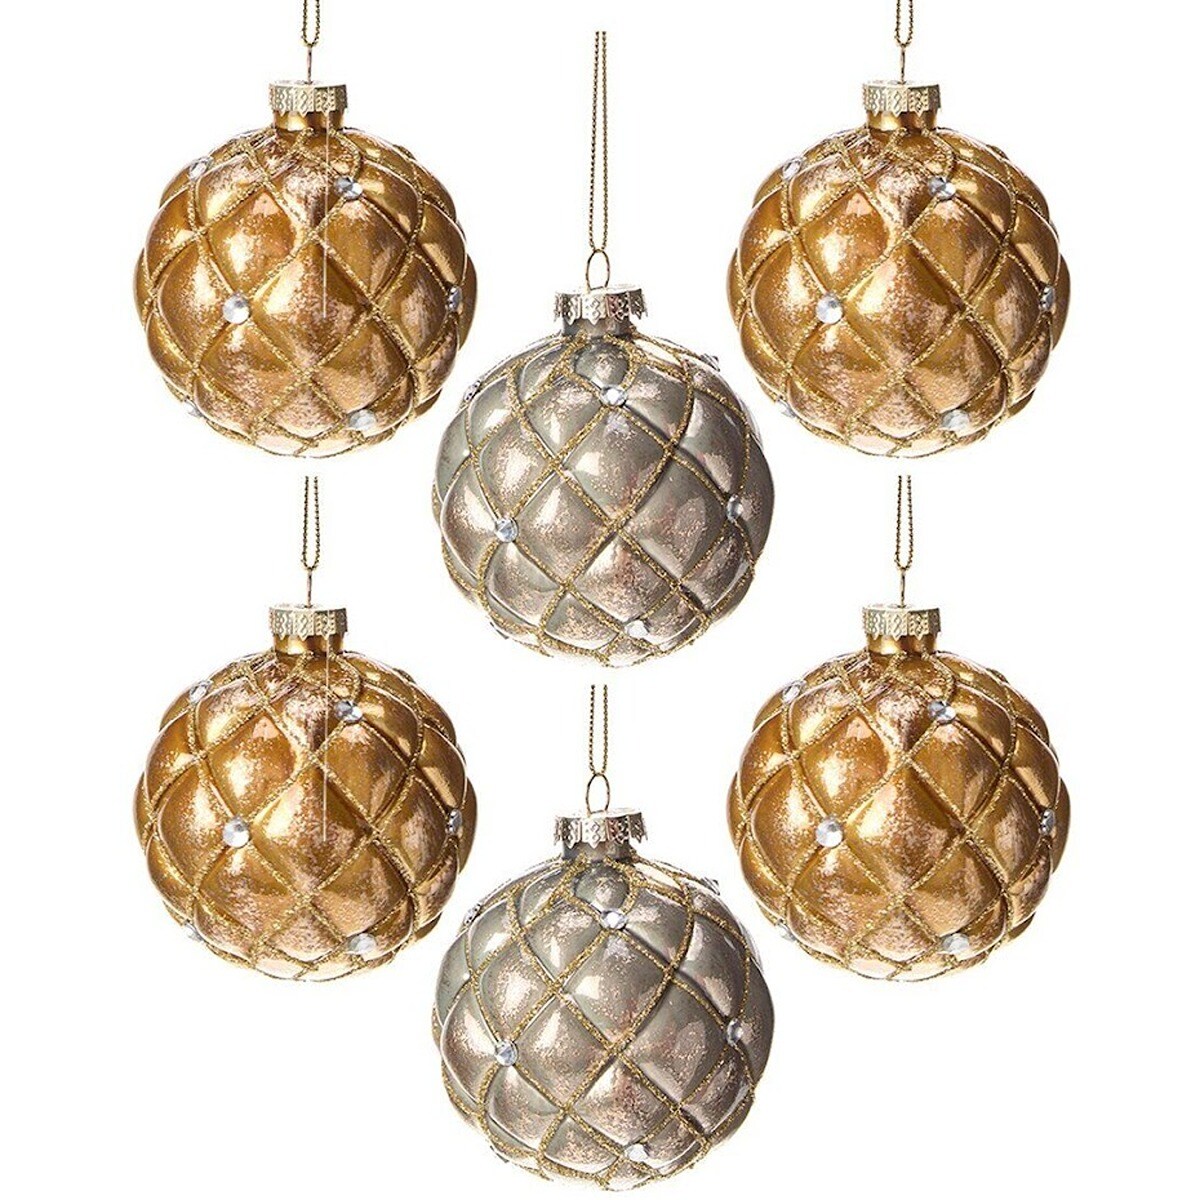 3 Inches Glossy Glass Ball Christmas Ornaments